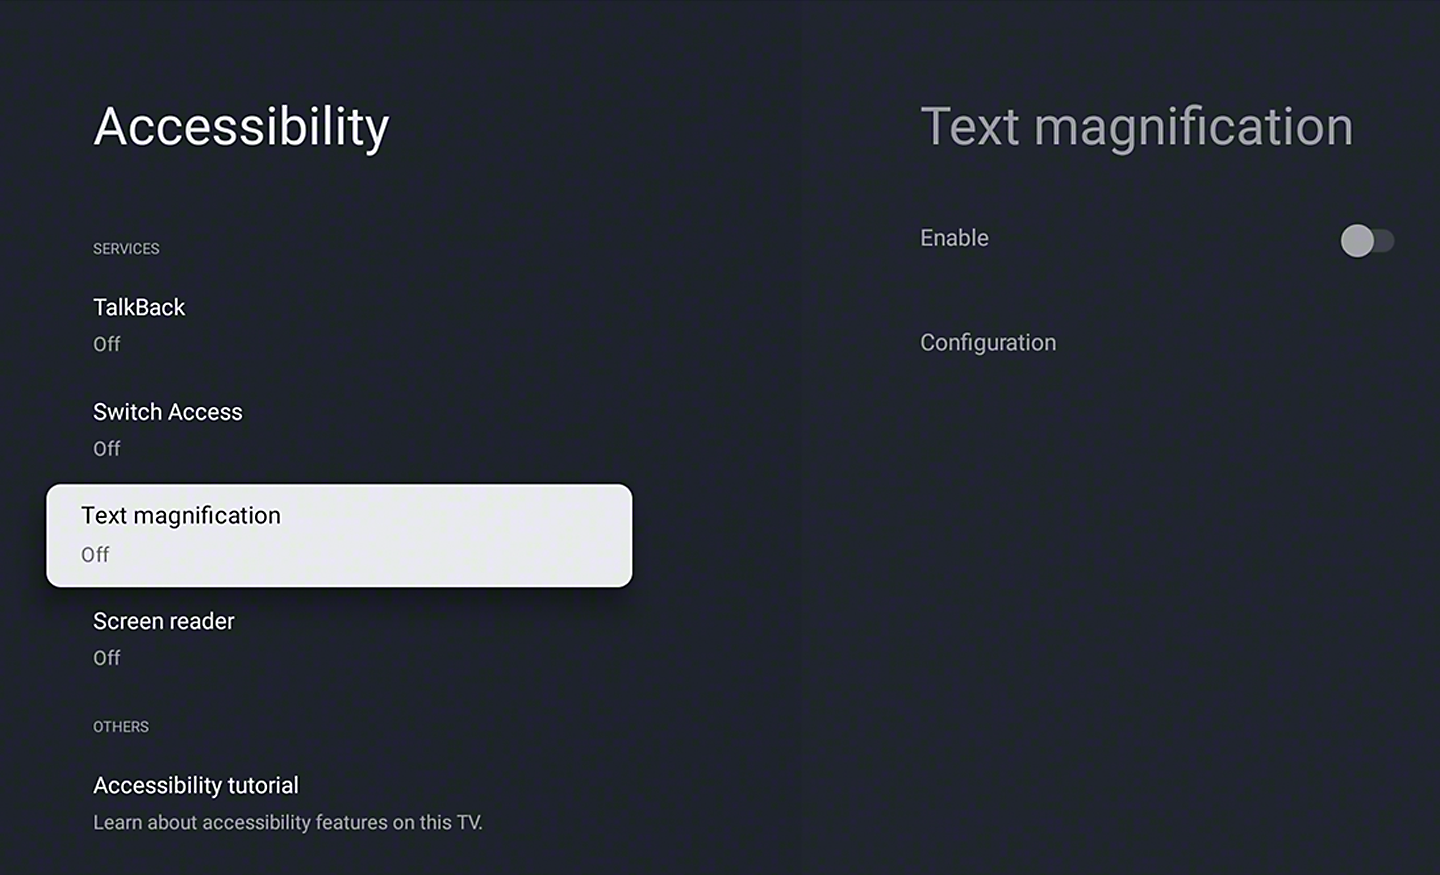  Image of a TV menu with Talkback and text magnification options shown